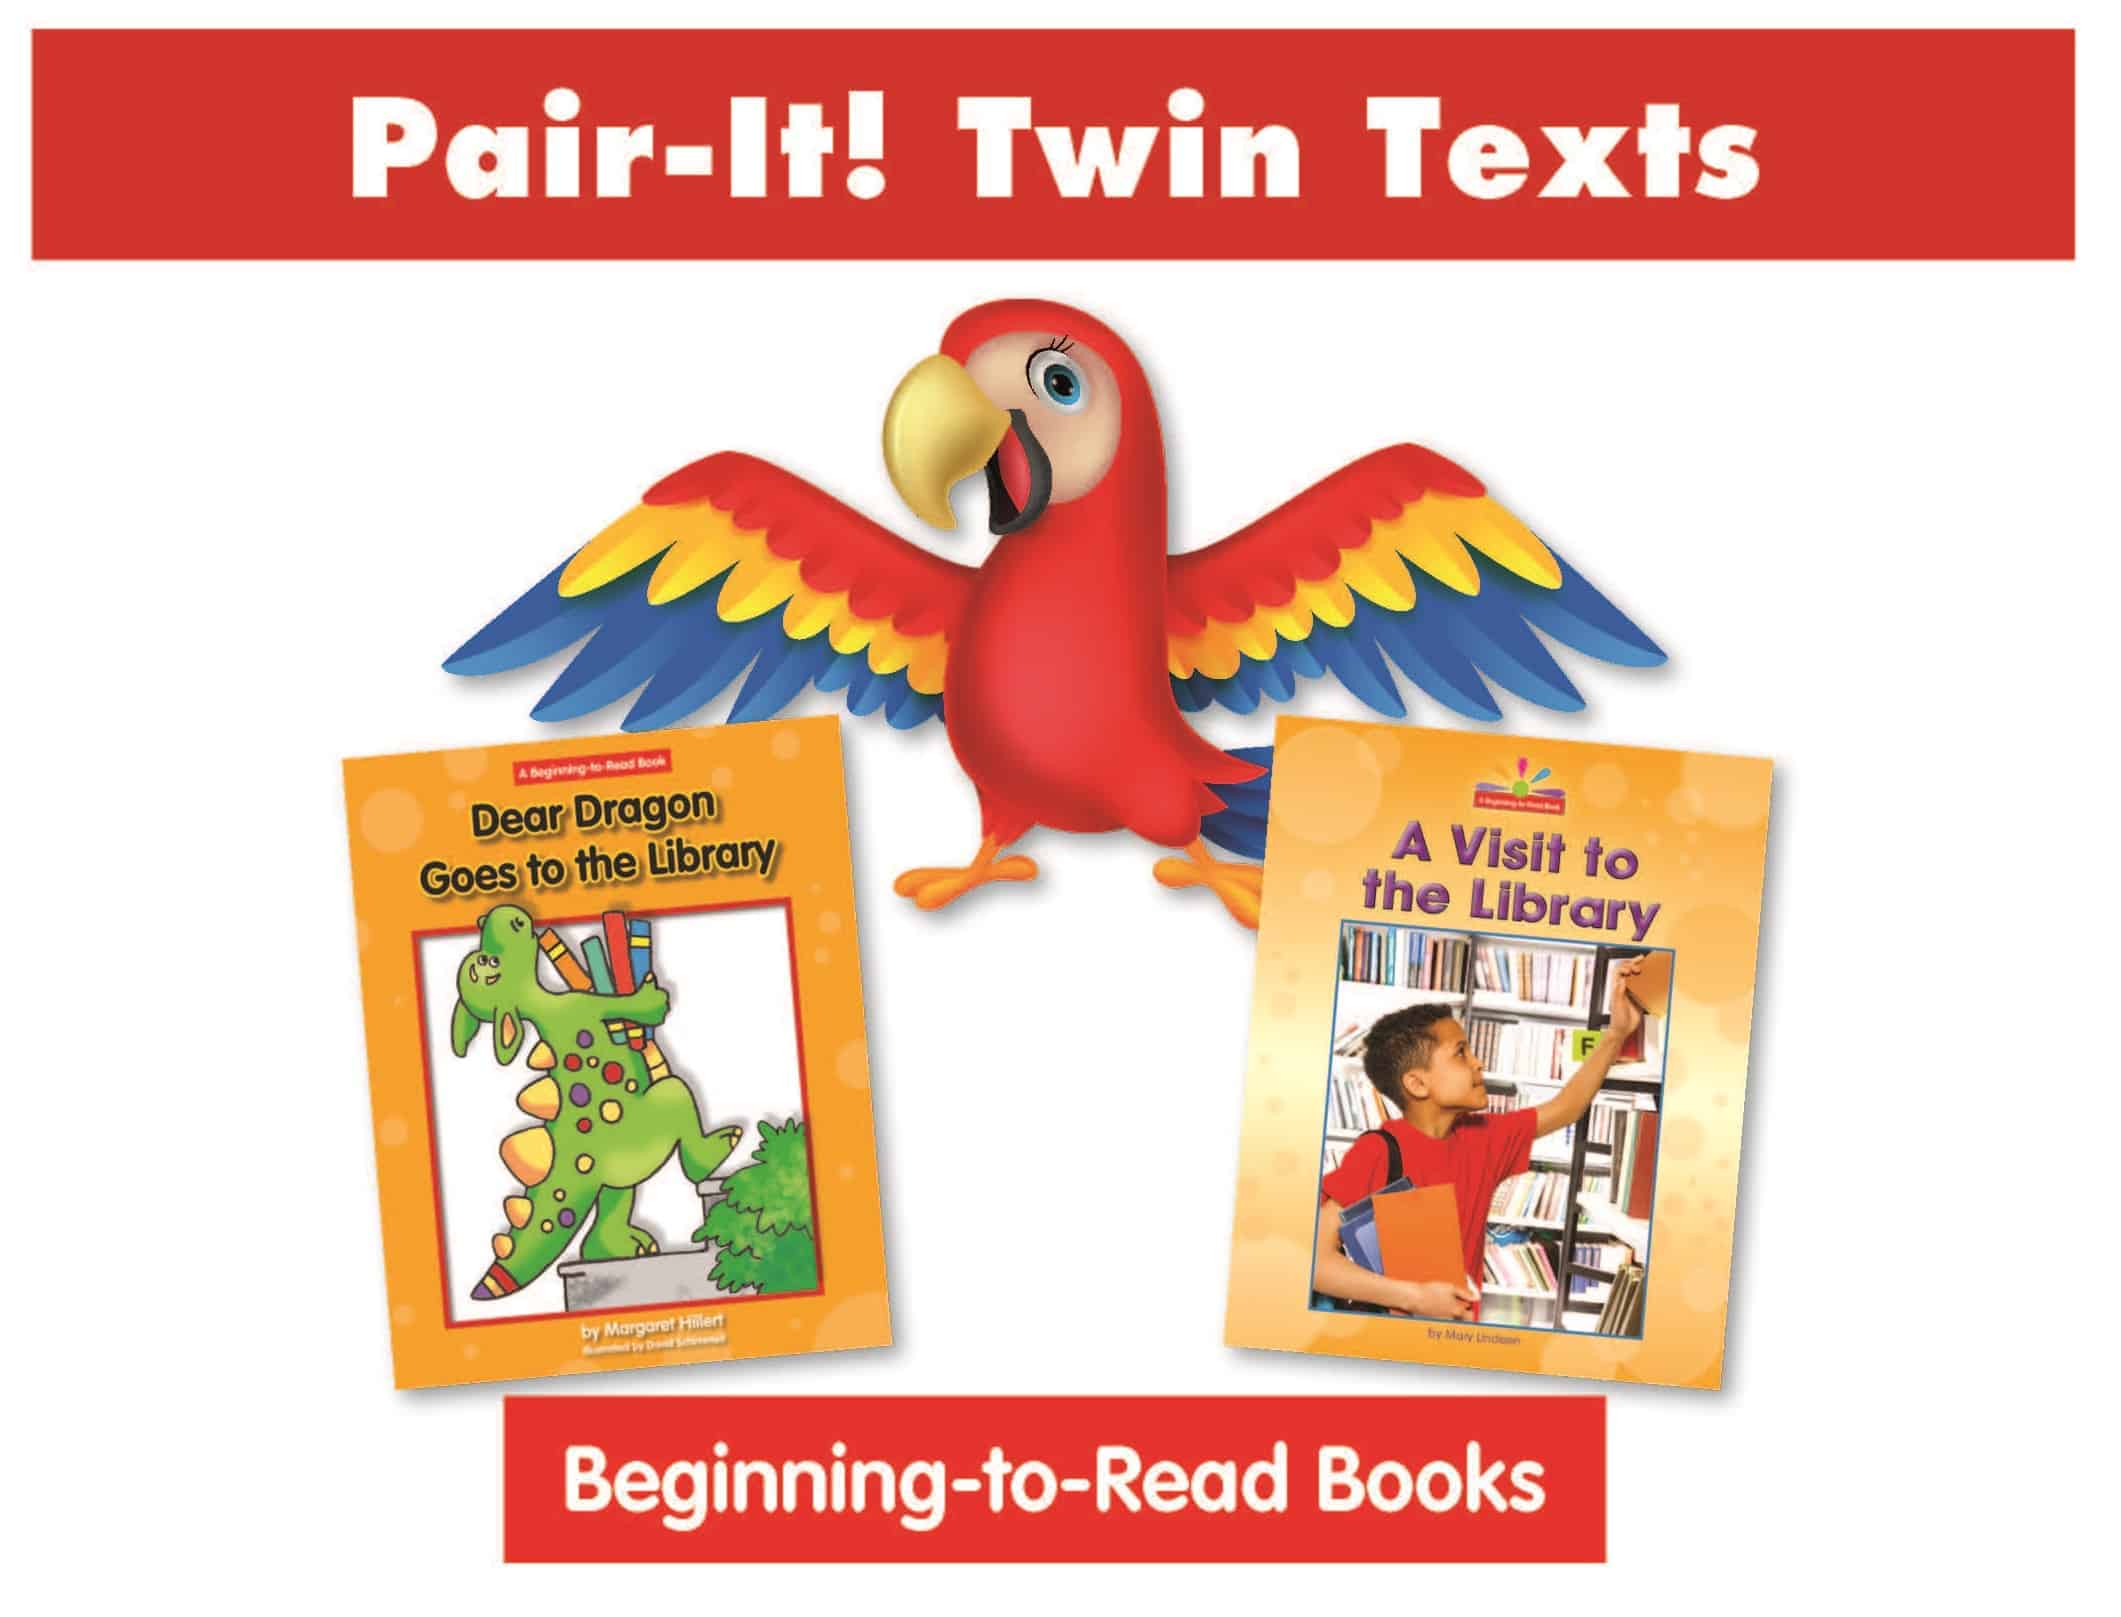 Holidays Pair-It! Twin Text Set 1 (8 books)